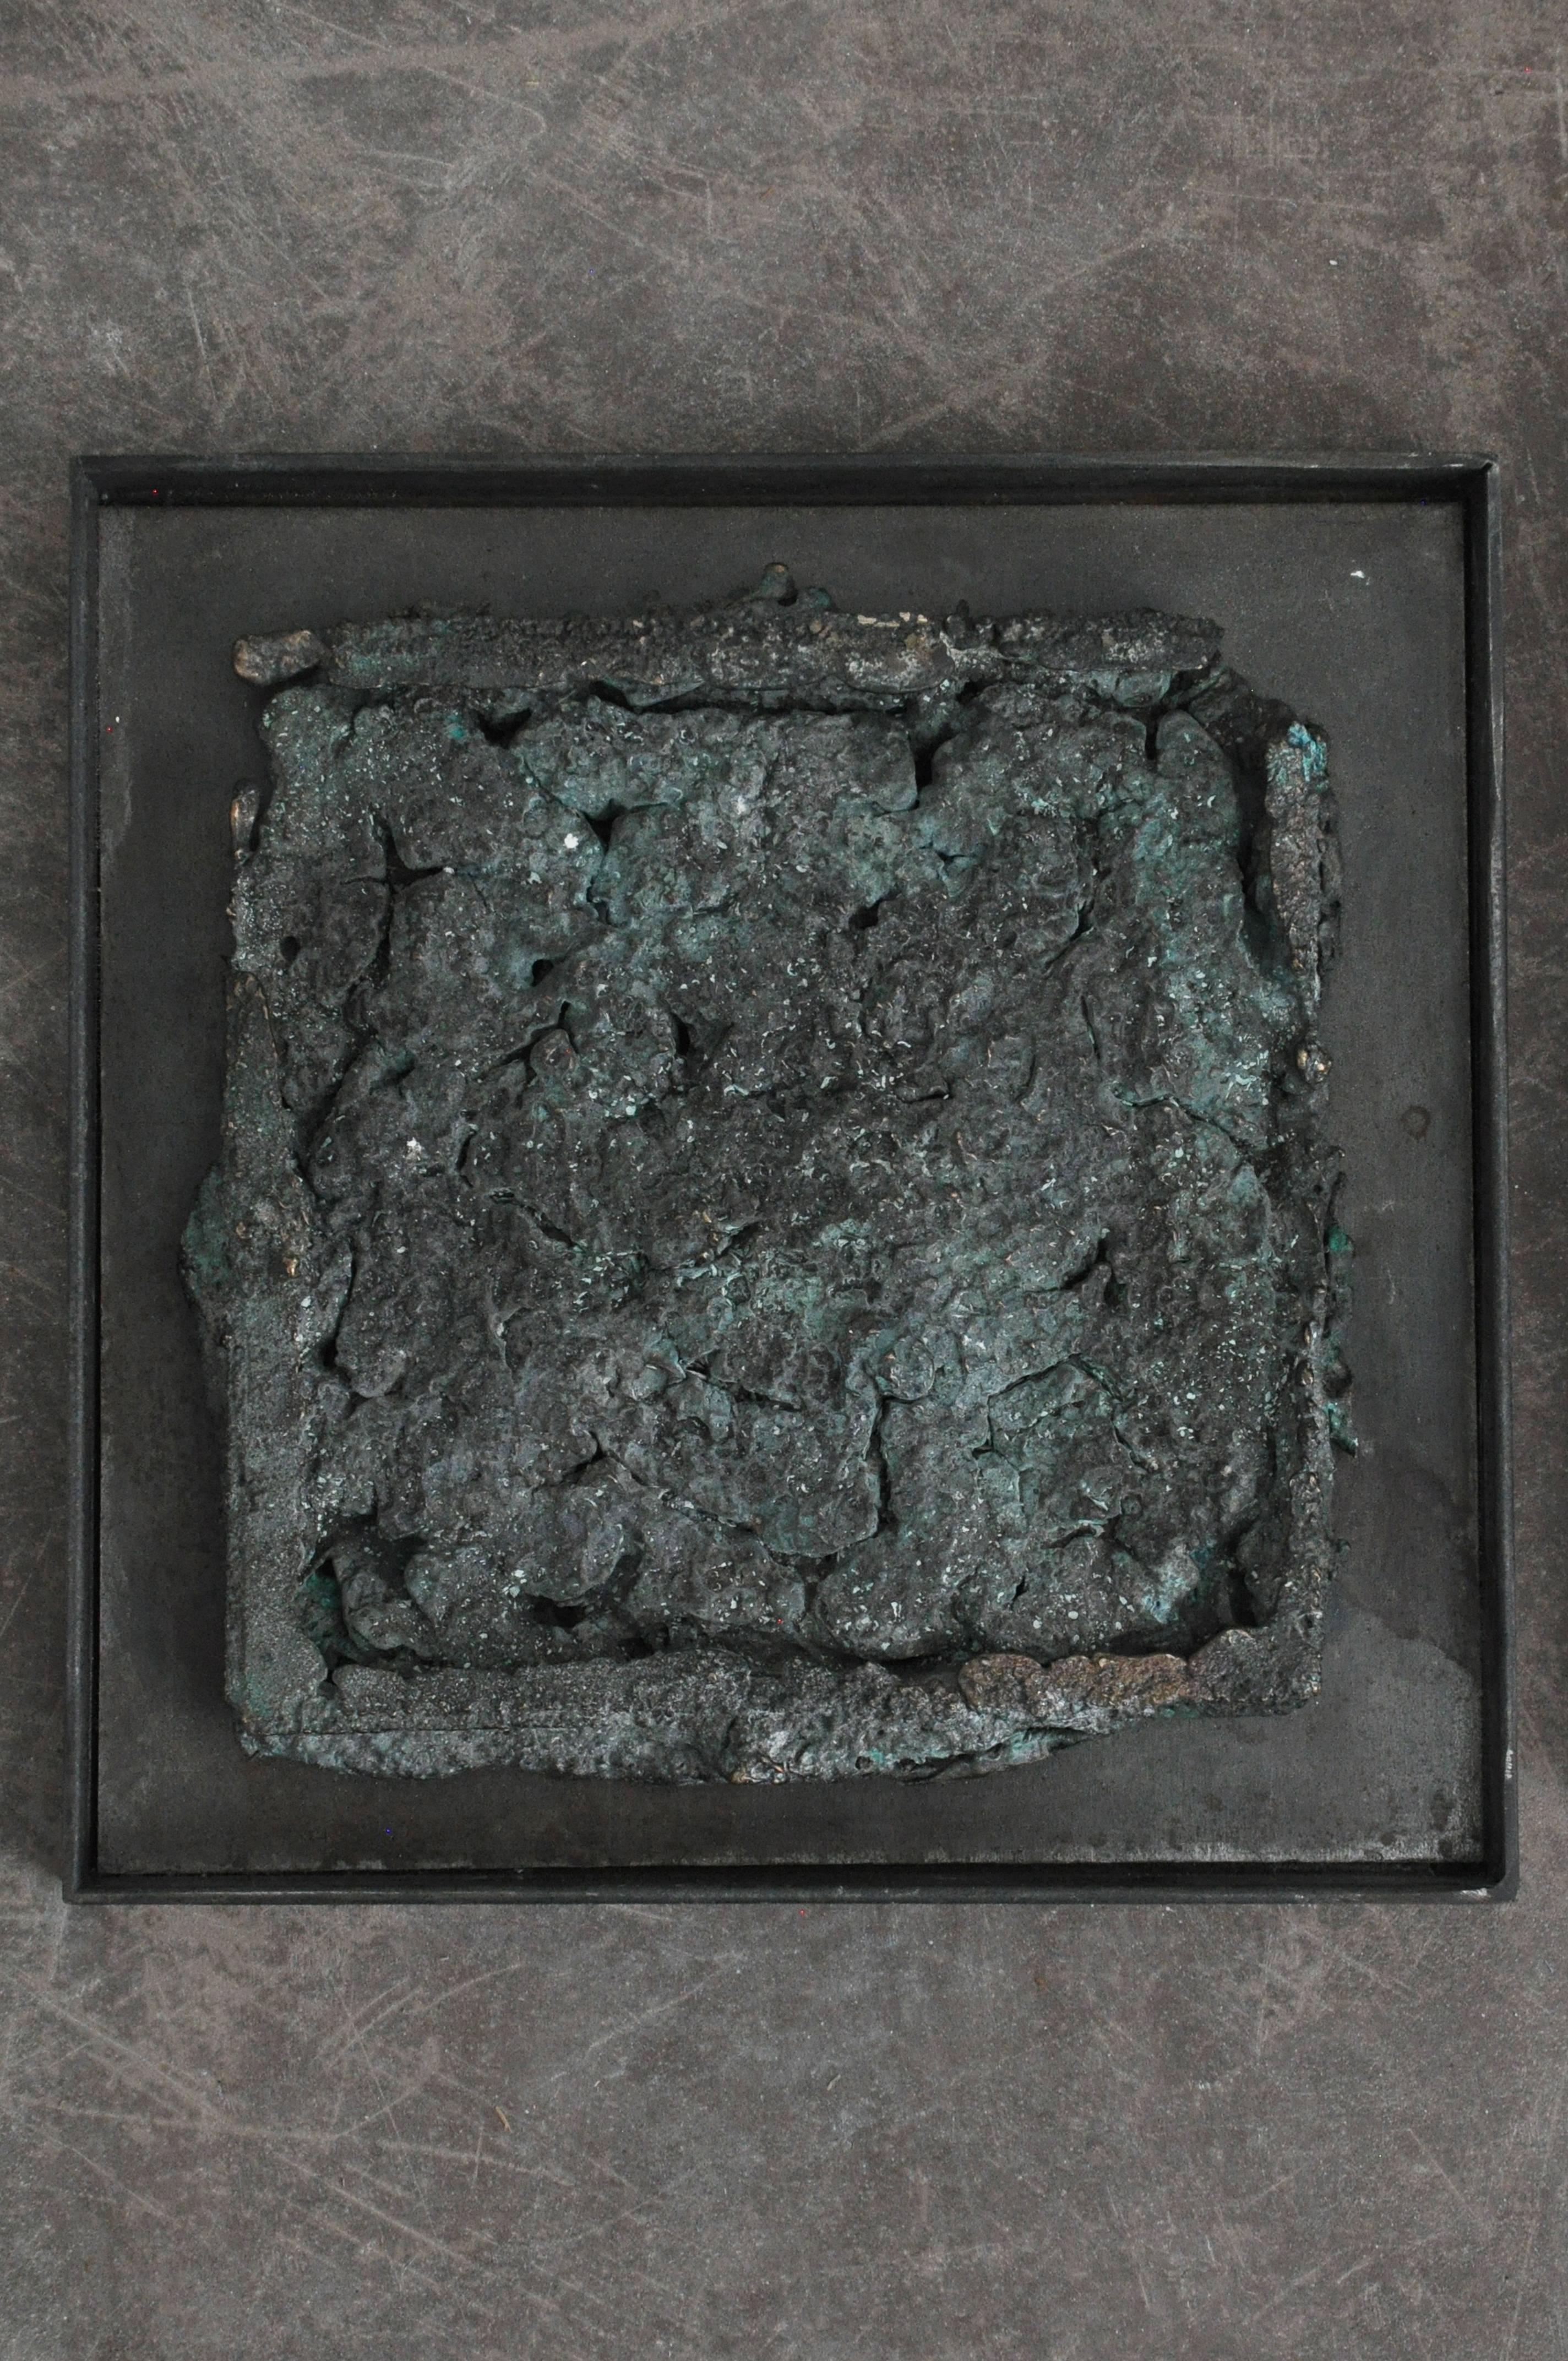 21st century bronze over-pour sculptures by Elliot Bergman.
Elliot Bergman is musician (Wild Belle) as well as a painter, printmaker and sculptor.
Patina has a beautiful verdigris green.
Over-pour encased in steel frames for table top or wall